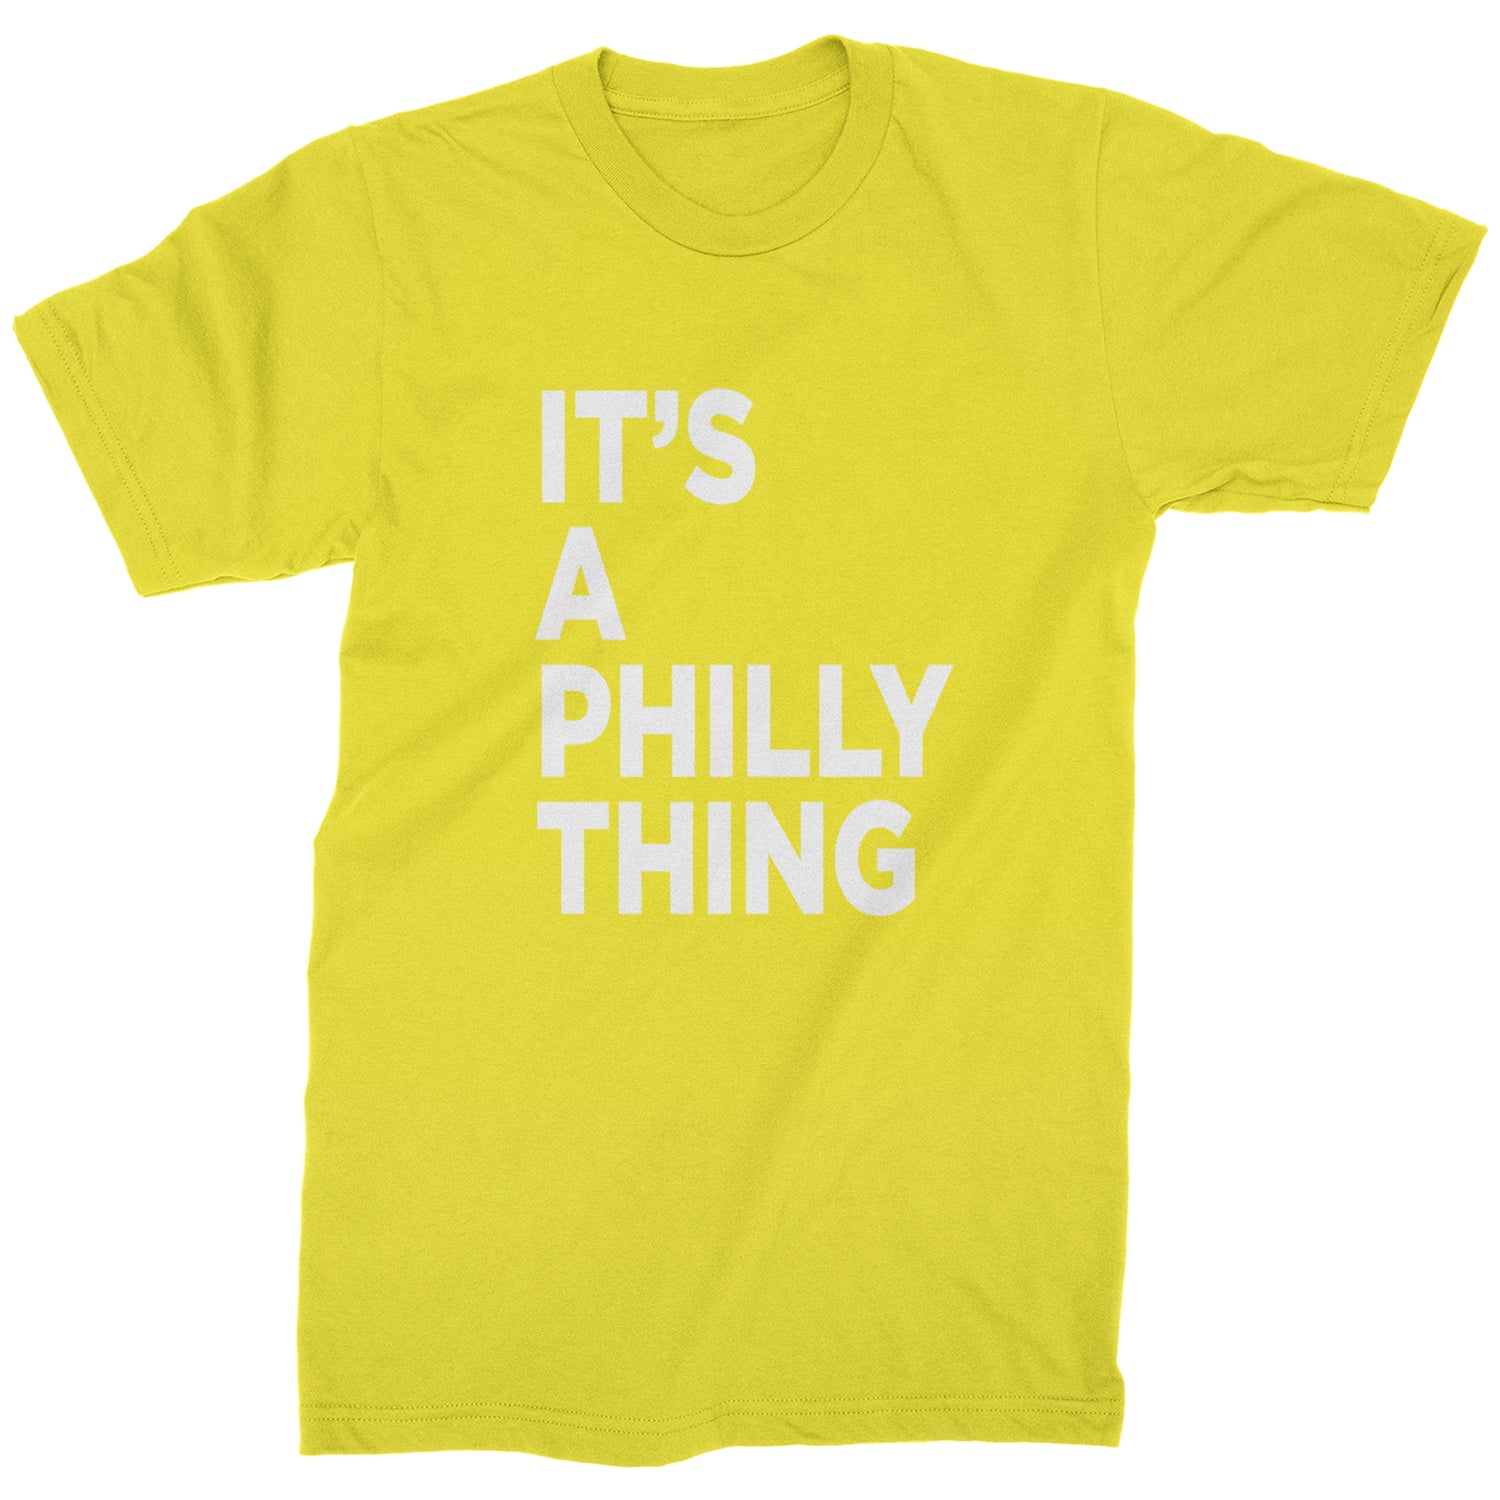 PHILLY It's A Philly Thing Mens T-shirt baseball, dilly, filly, football, jawn, morgan, Philadelphia, philli by Expression Tees